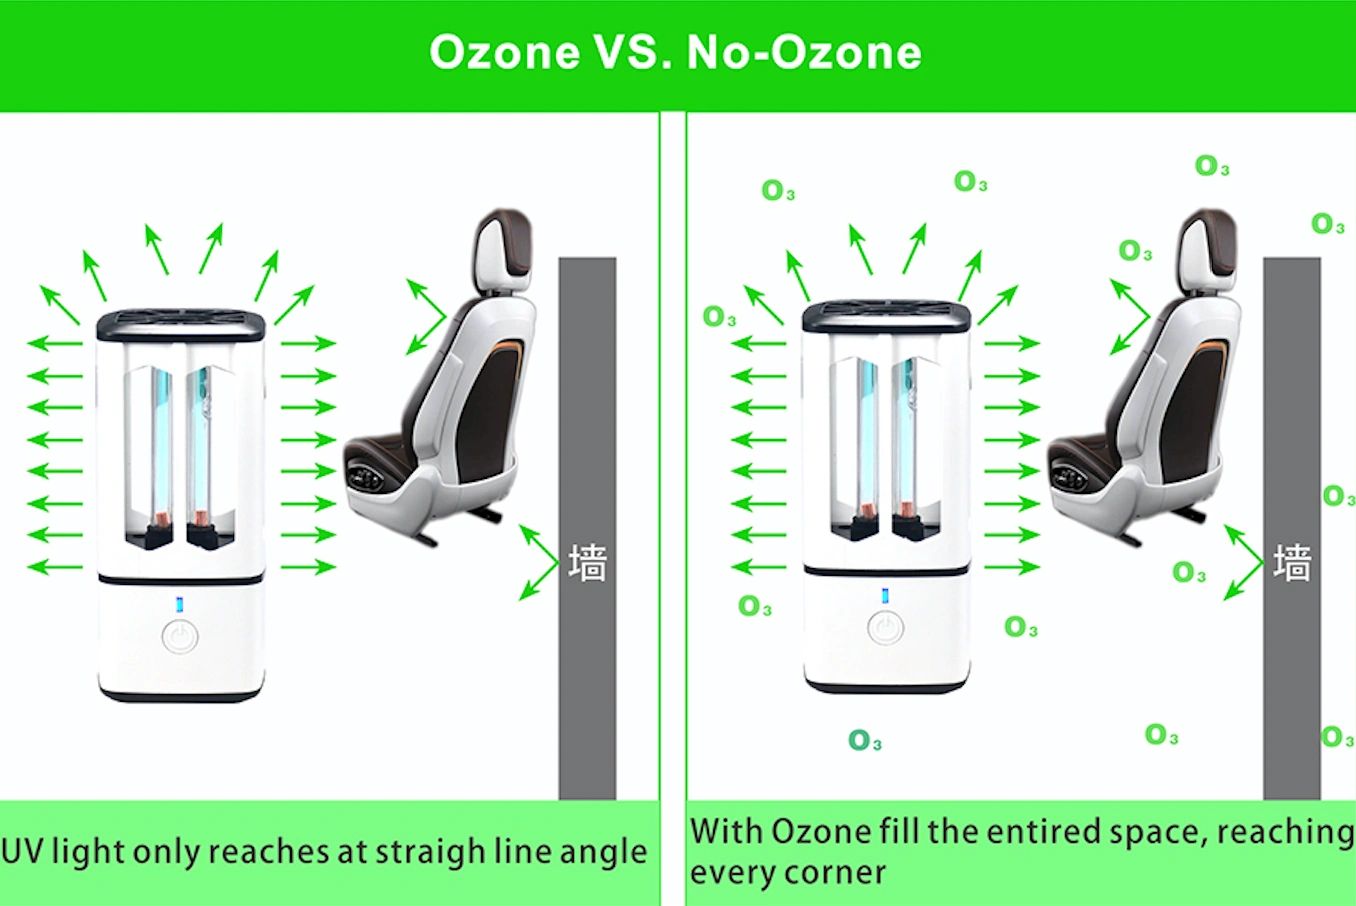 Ozone disinfects thoroughly reaching every corner that UV light can't reach